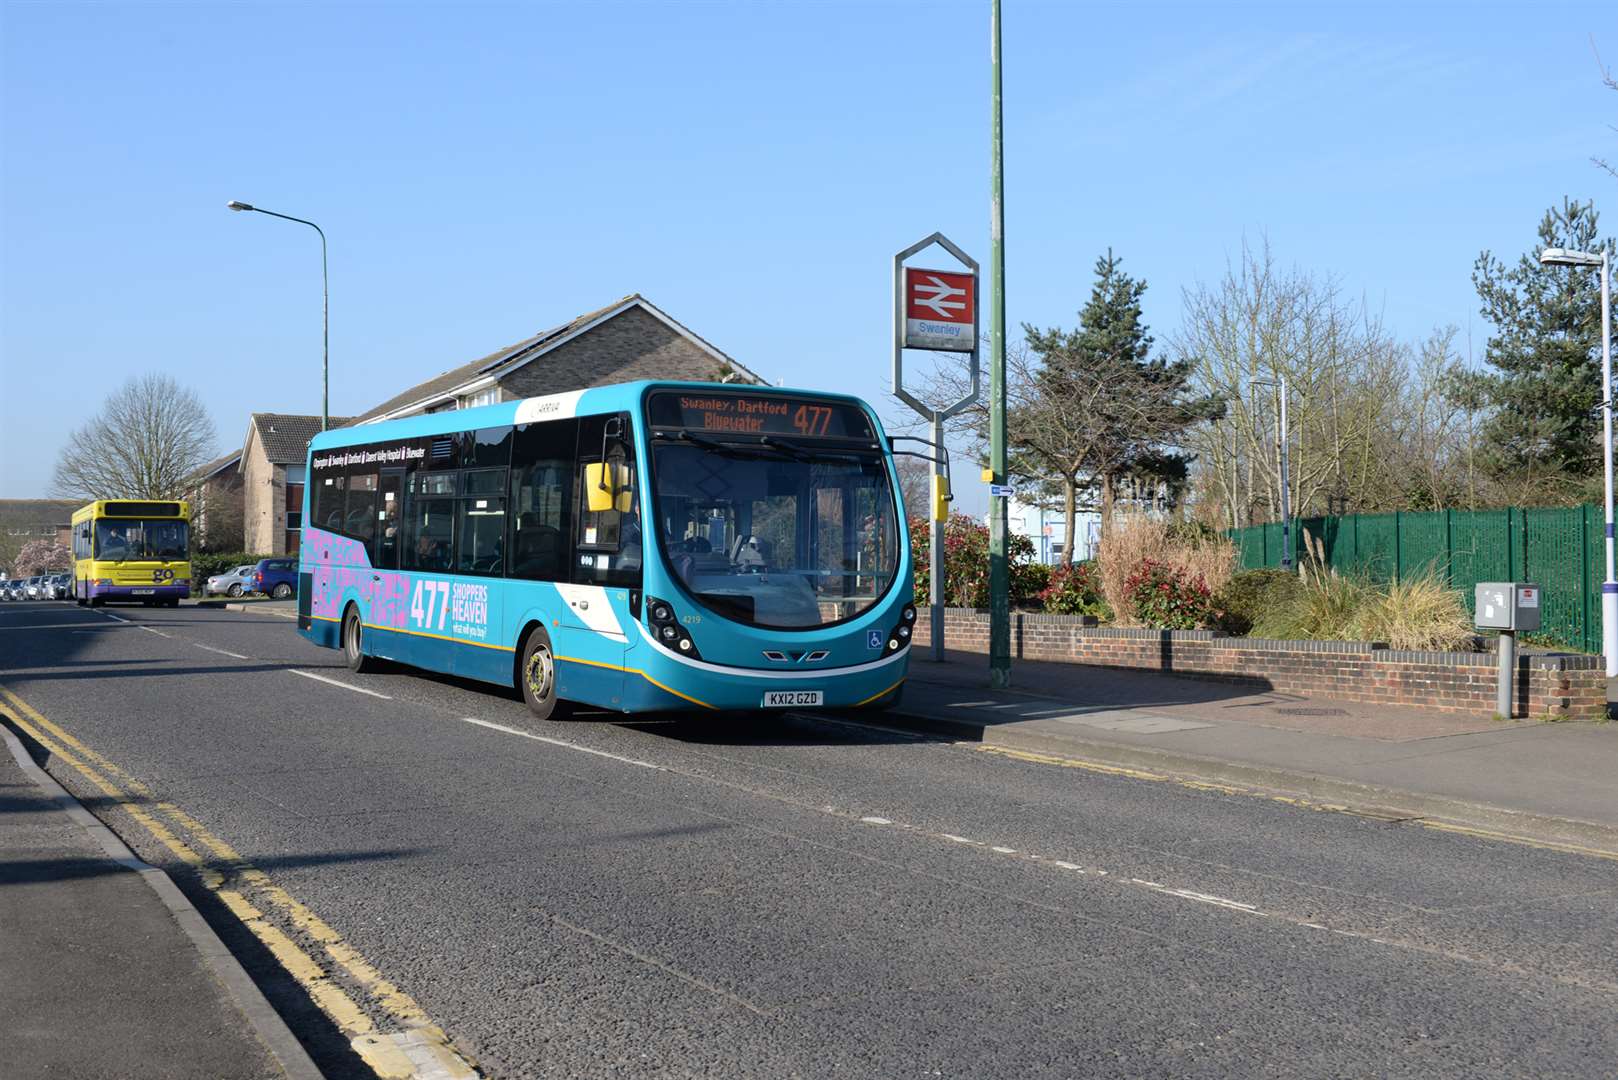 Swanley Town Council leader Tony Searles said the affected bus routes had been used for years.